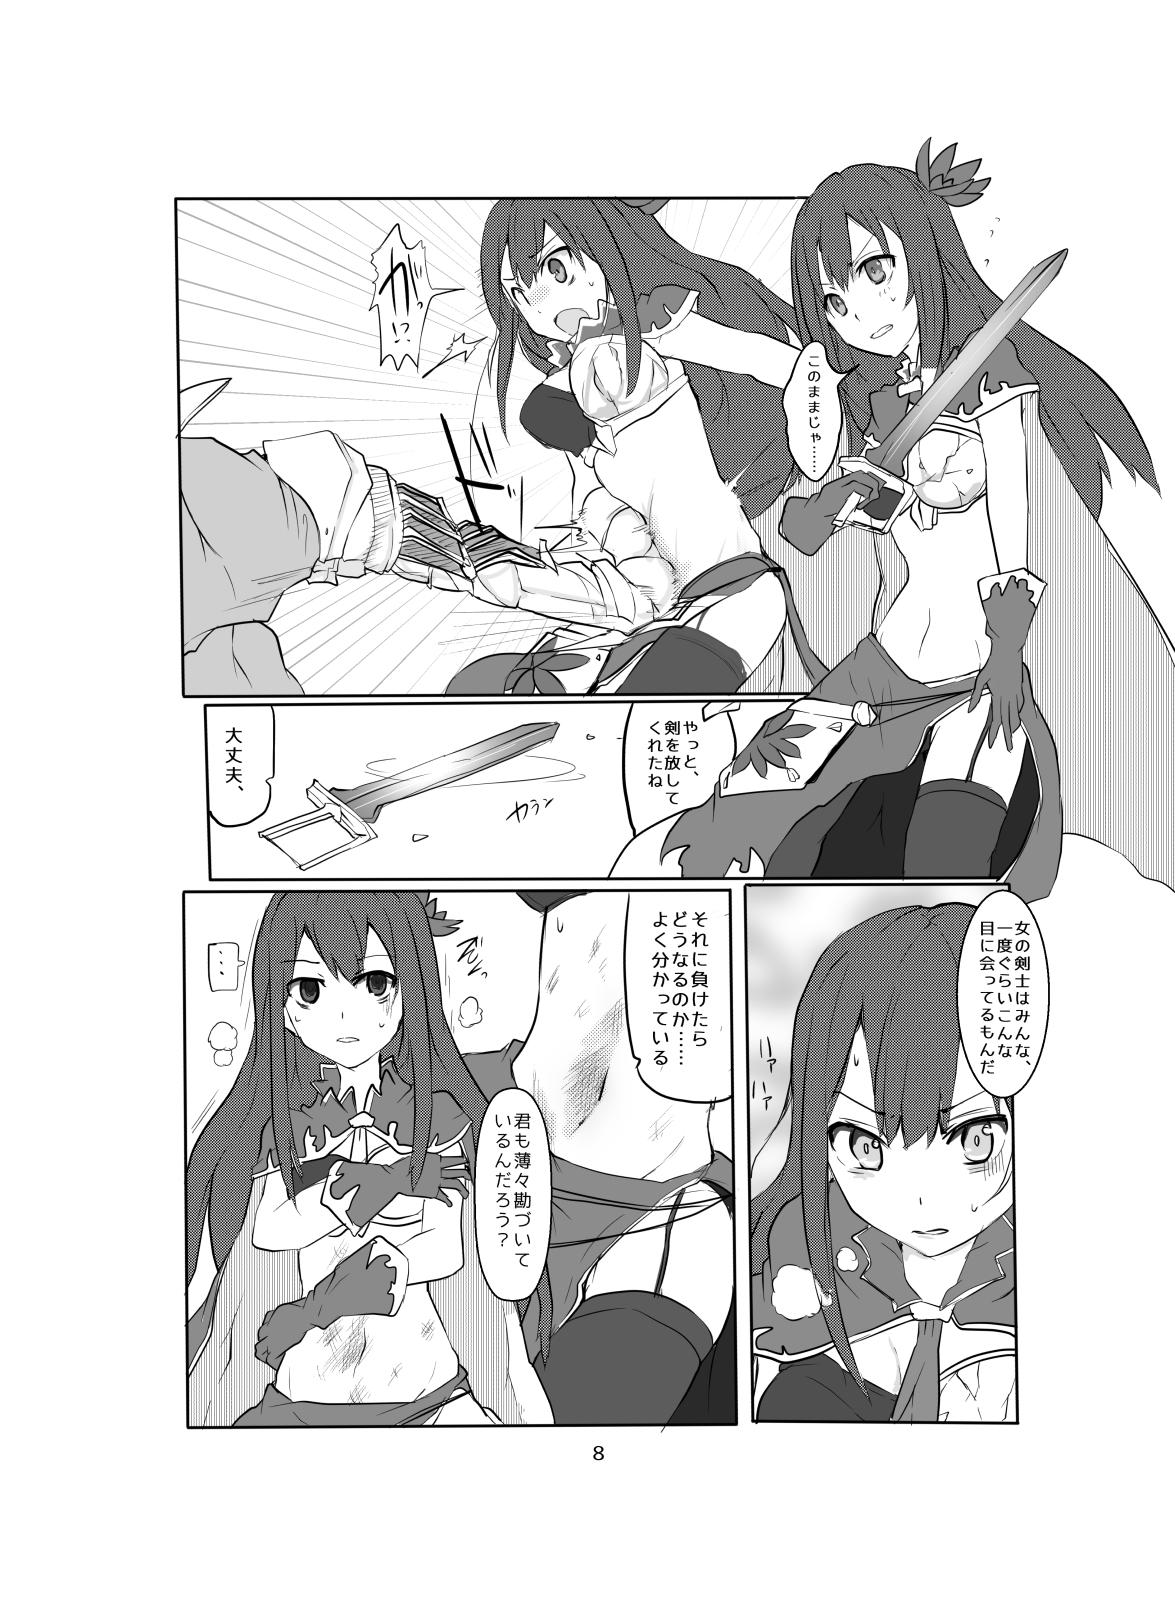 Sesso HBB Artwork 8 - The idolmaster Gaysex - Page 9